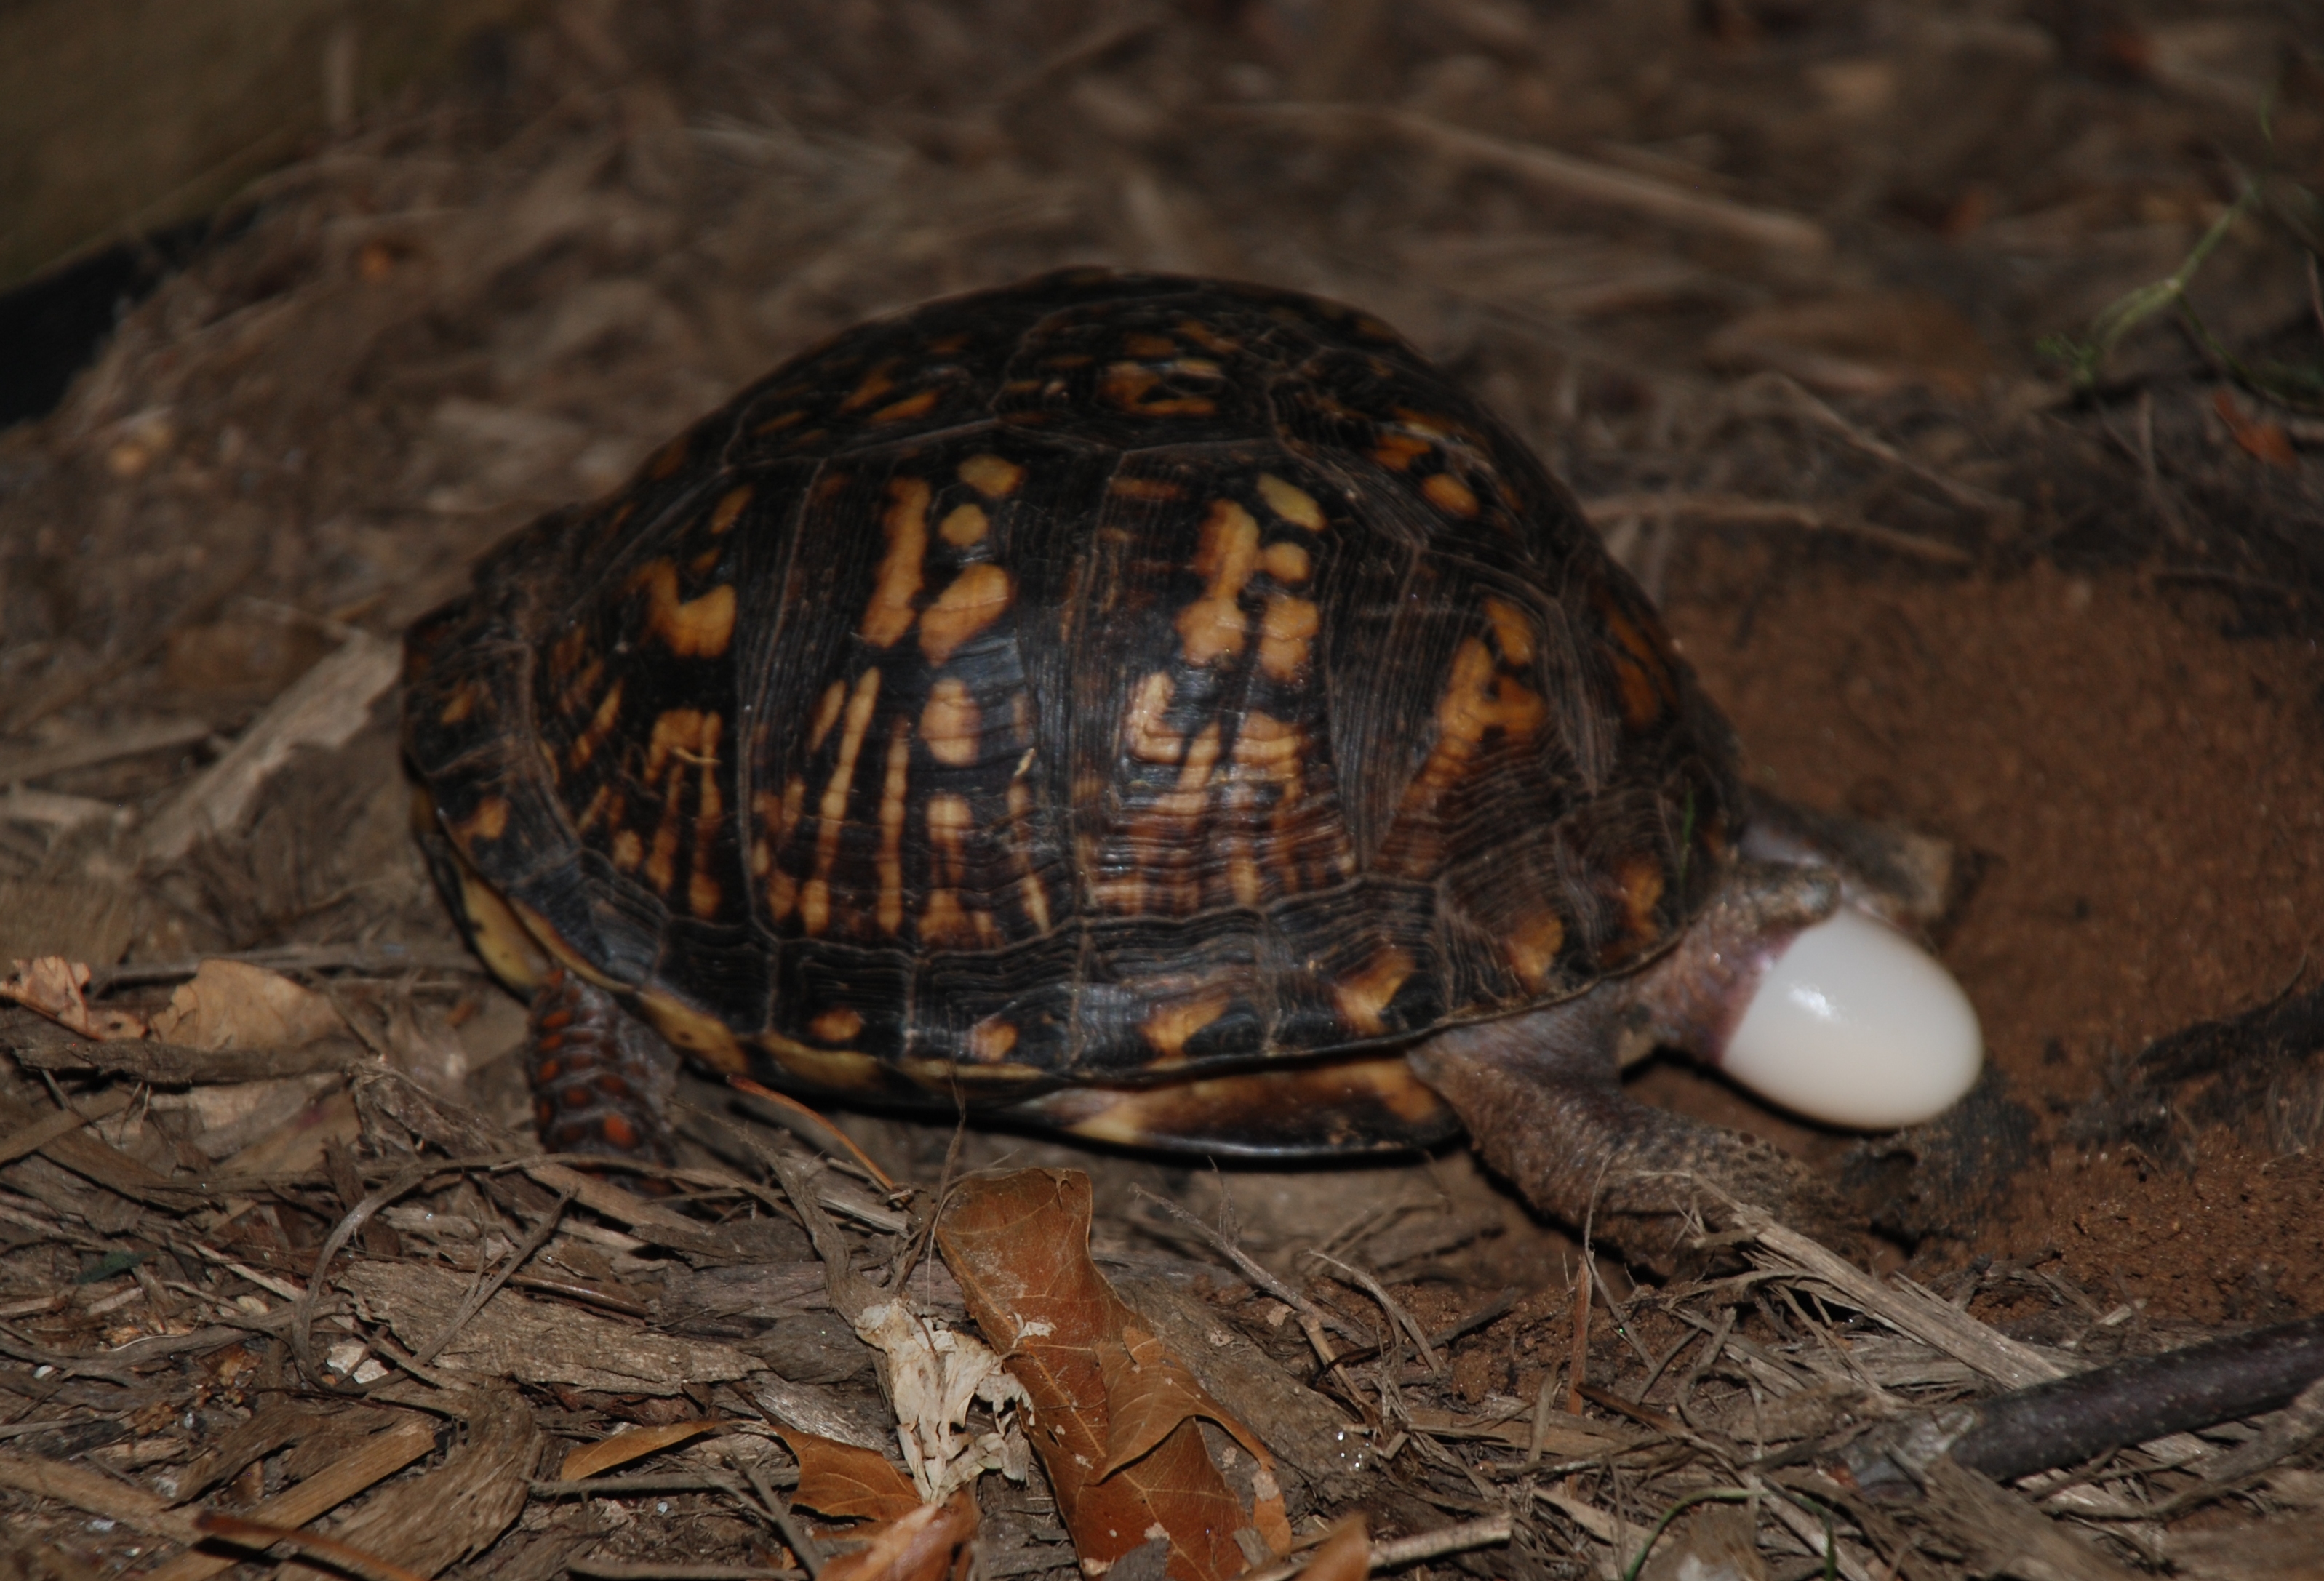 What are some facts about box turtles?